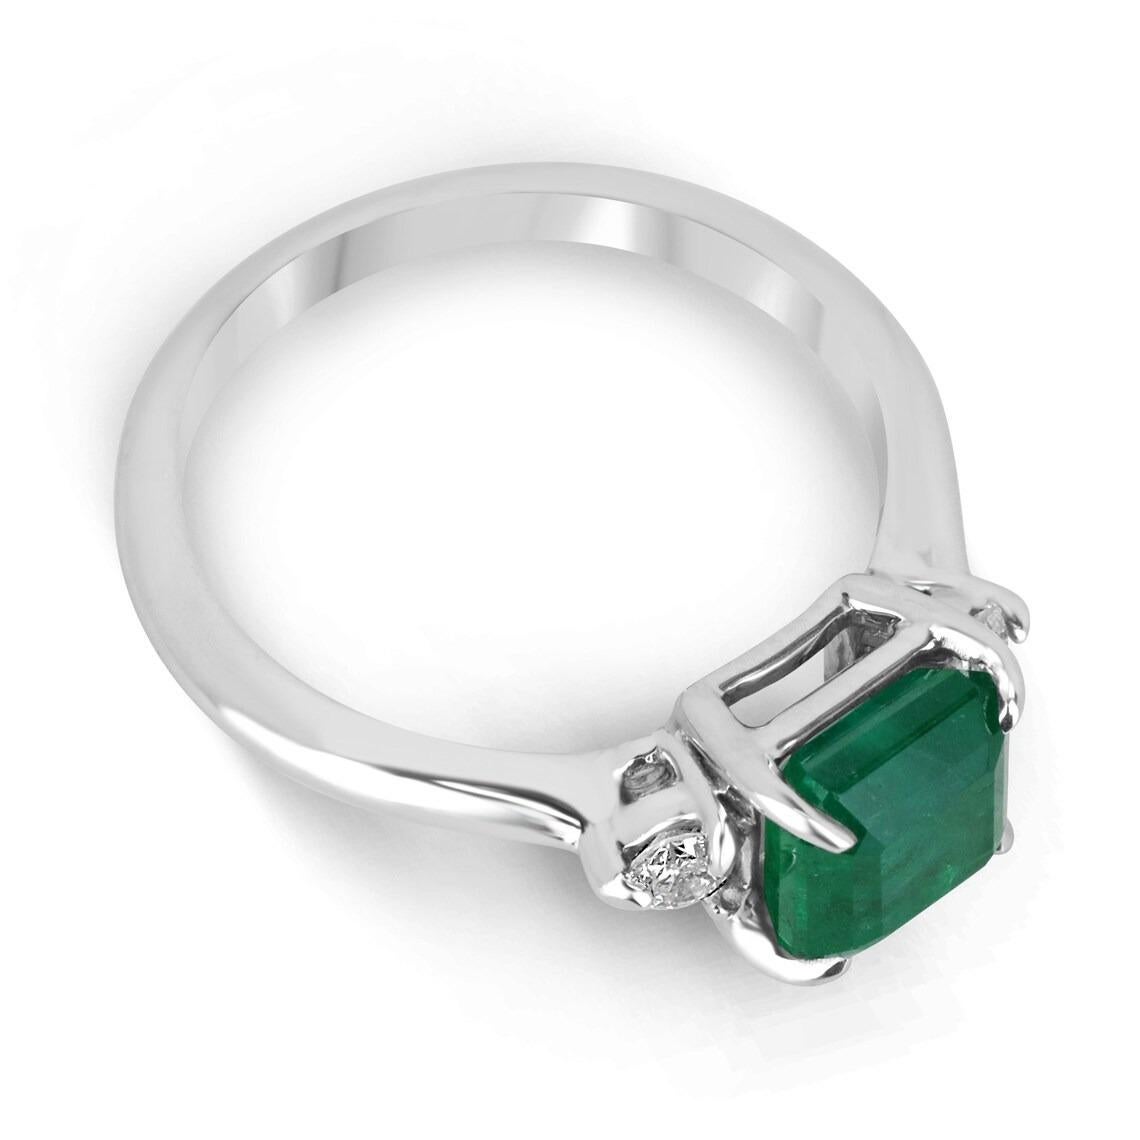 A classic emerald and diamond engagement, statement, or right-hand ring. Dexterously crafted in gleaming 14K white gold this ring features a 2.36-carat natural Zambian emerald-Asscher cut. Set in a secure prong setting, this extraordinary emerald